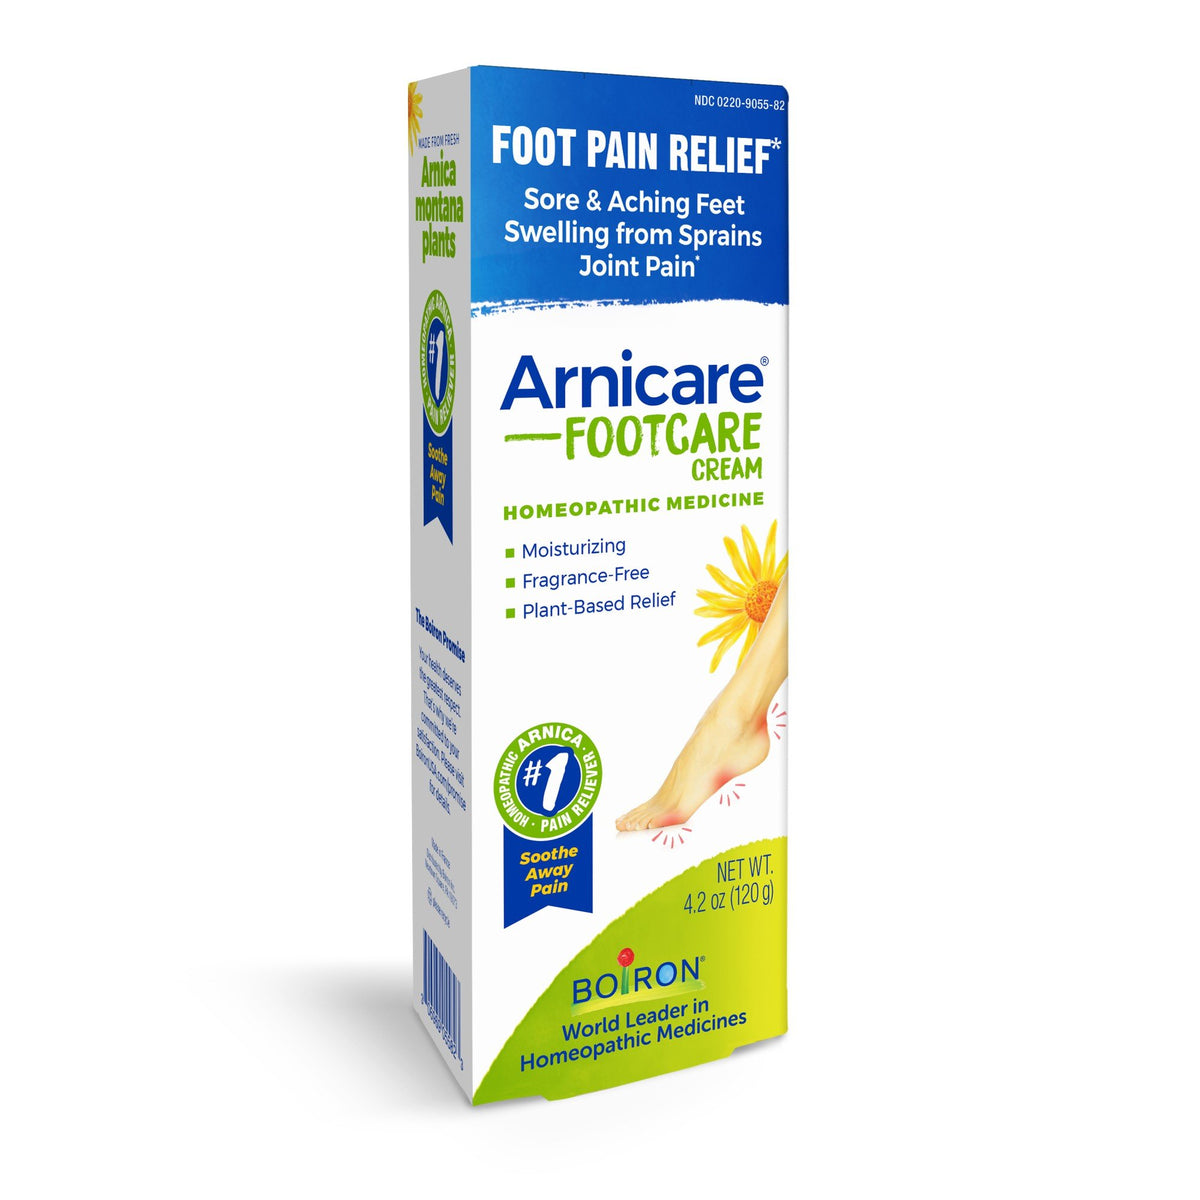 Boiron Arnicare FootCare Homeopathic Medicine For Foot Pain Relief 4.2 oz Cream